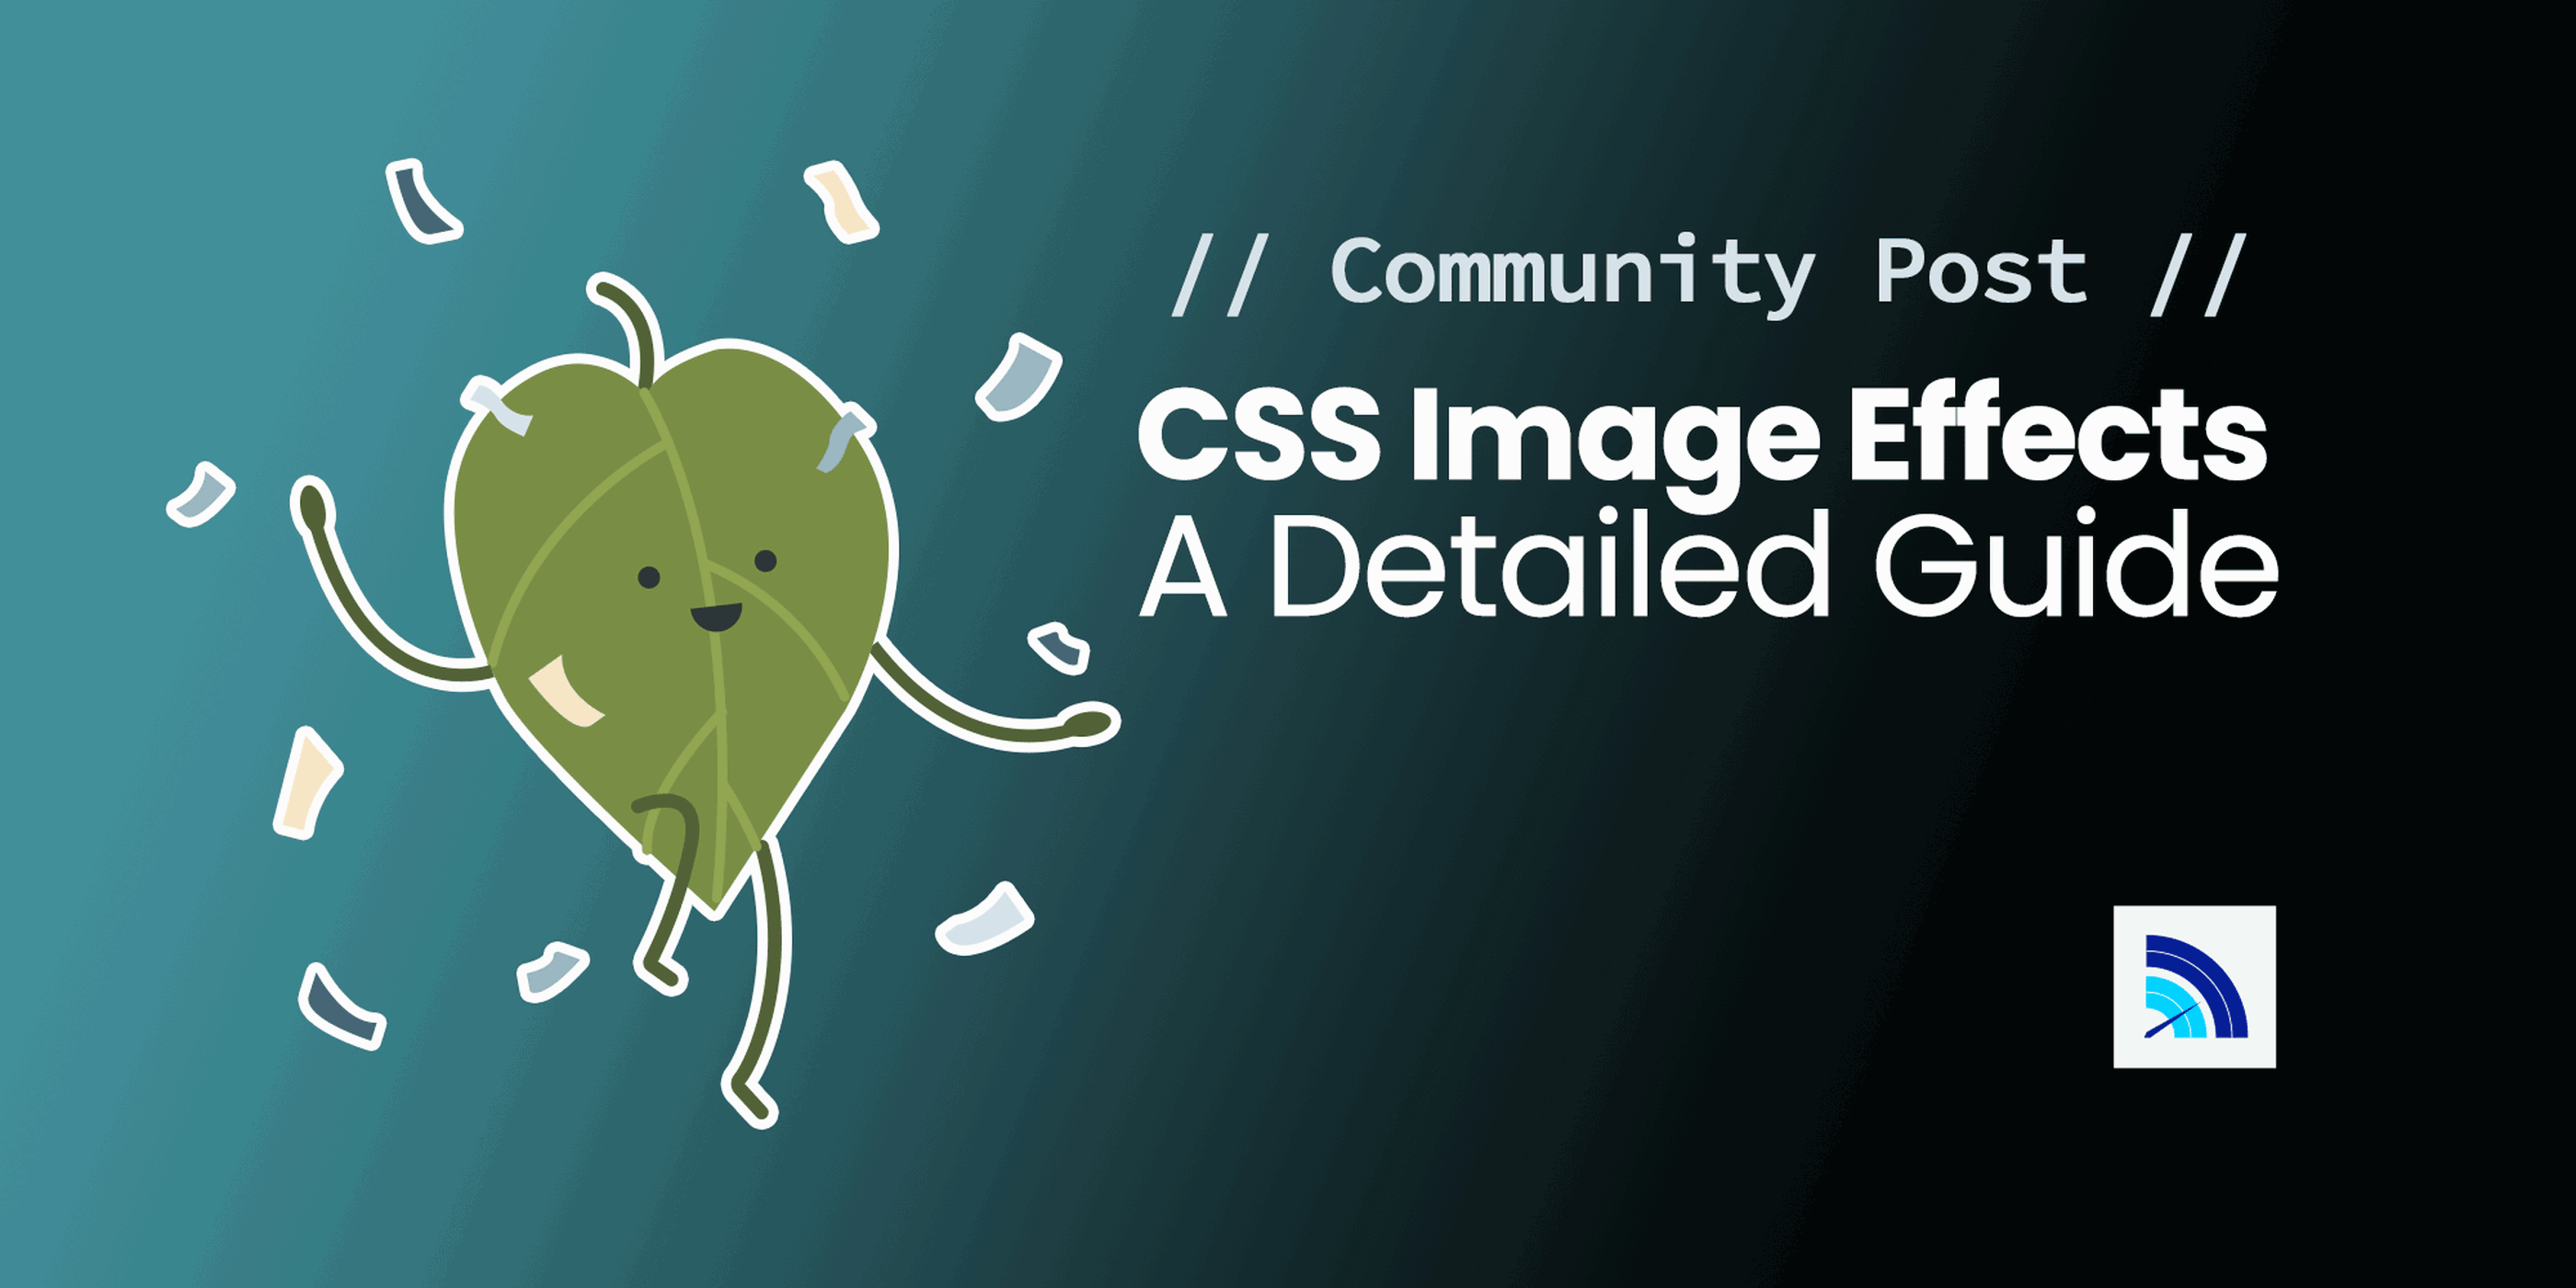 CSS Image Effects: A Detailed Guide